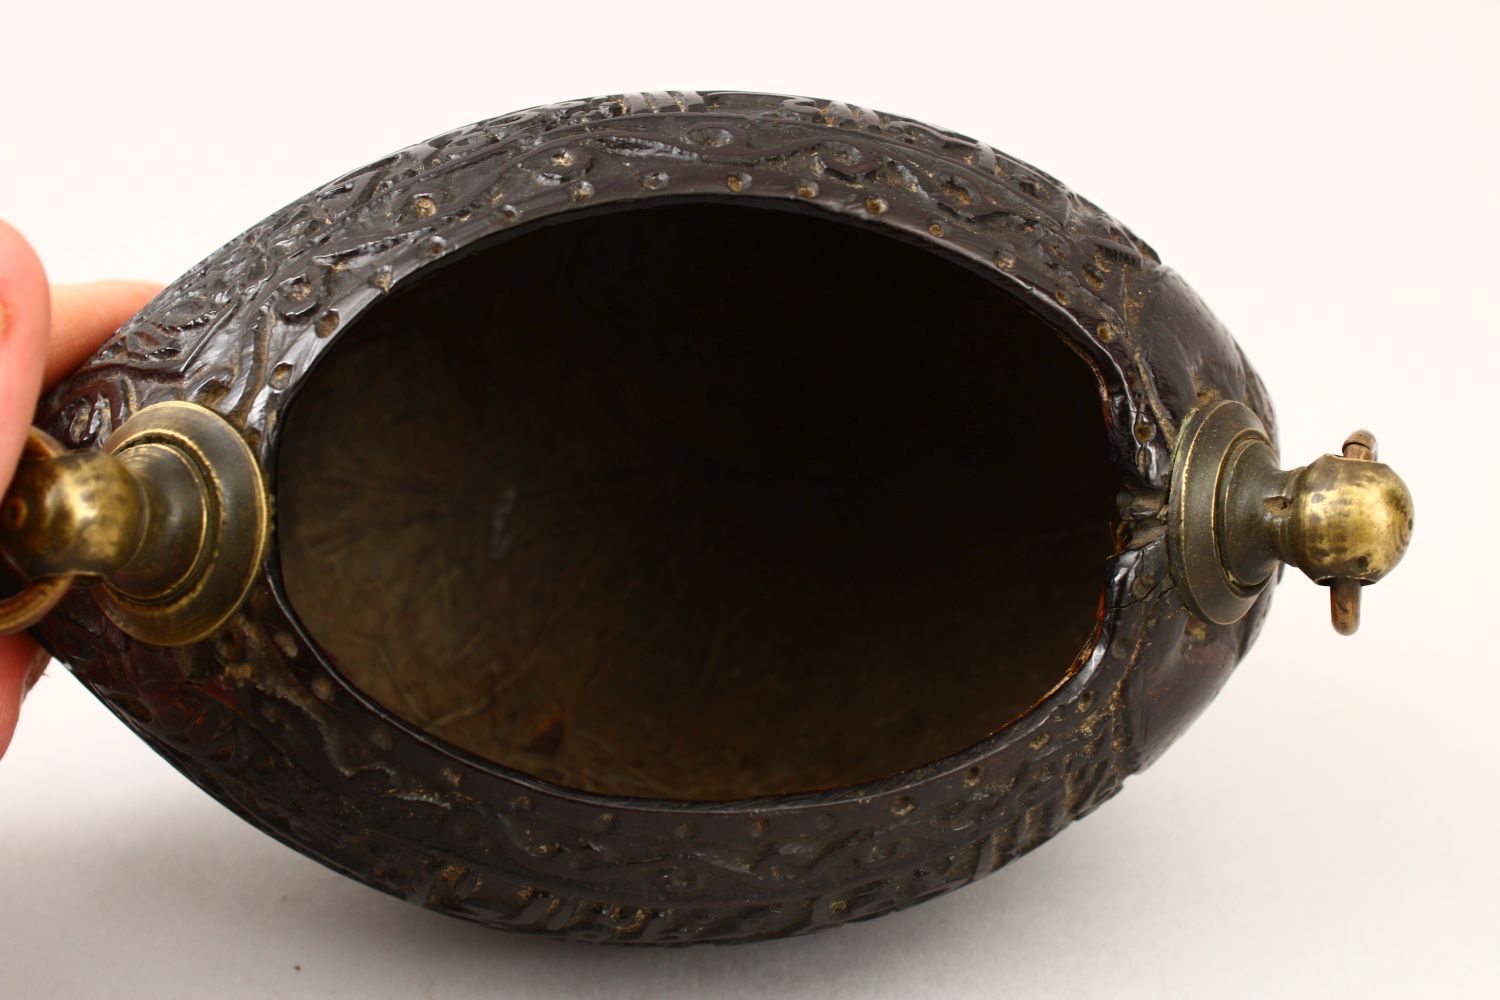 A GOOD 19TH CENTURY ISLAMIC COCO KASHKOOL, carved with Islamic calligraphy and scroll decoration - Image 11 of 14